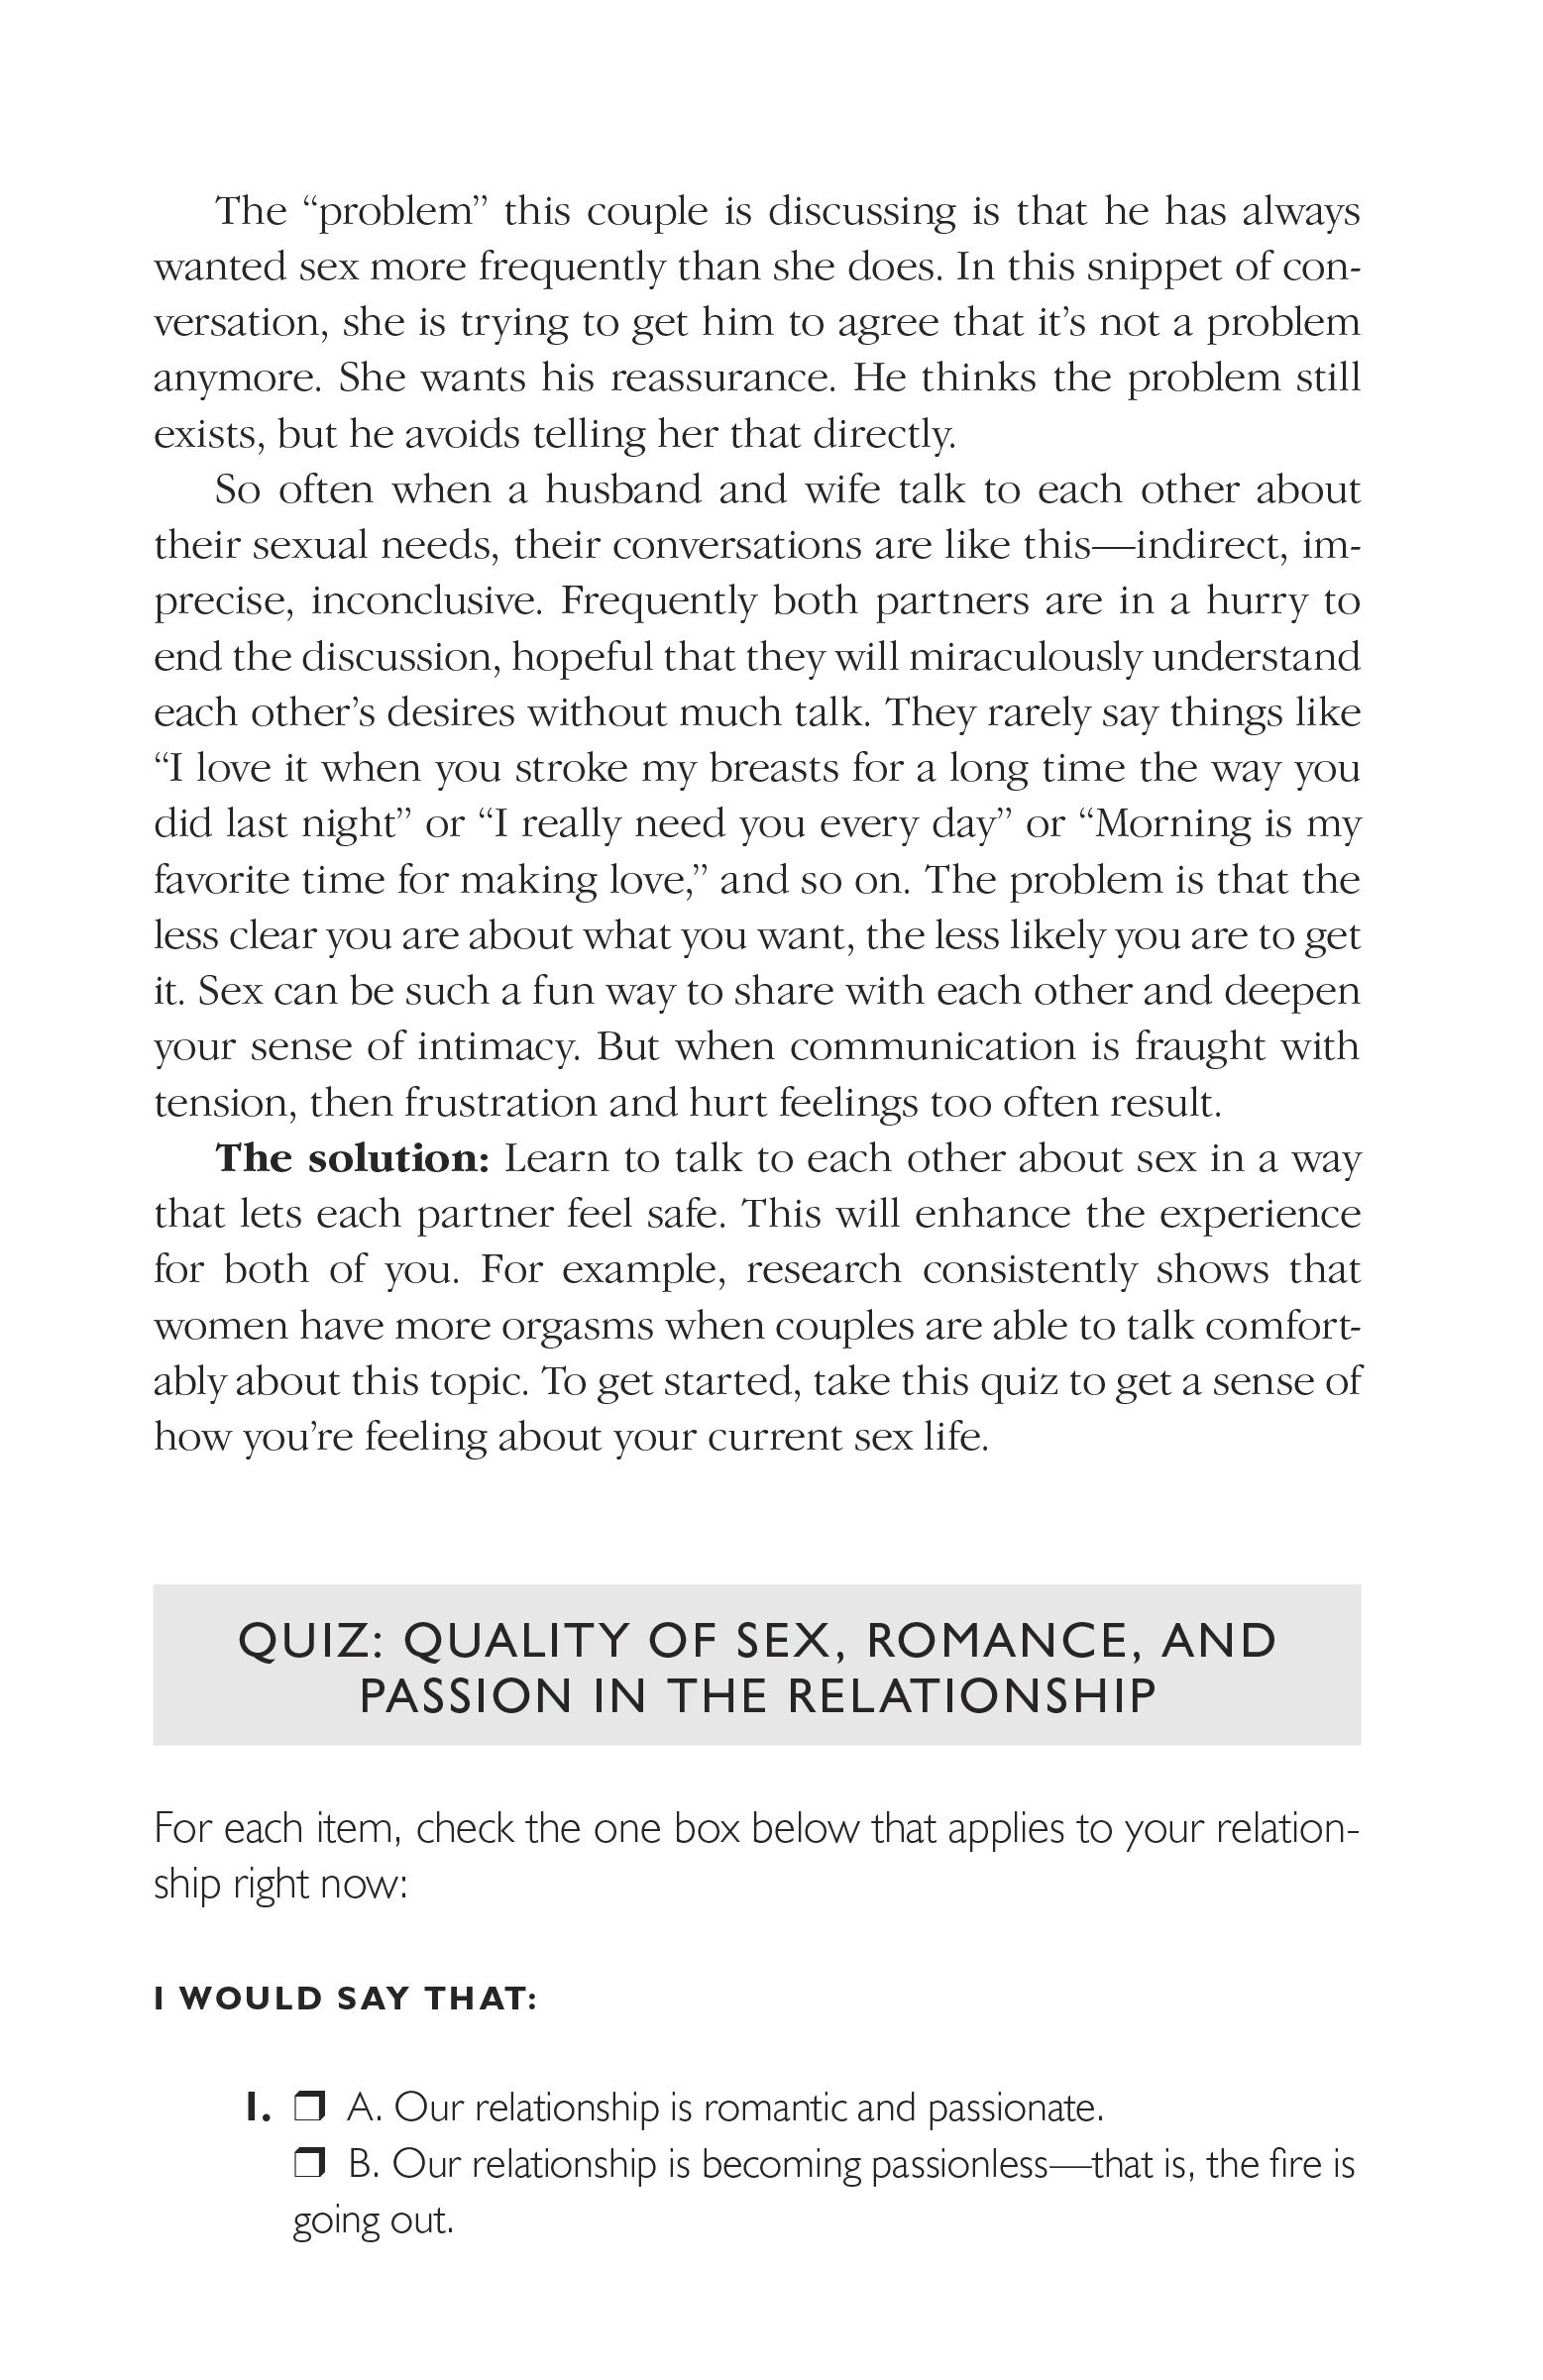 Extended ebook content for The Seven Principles for Making Marriage Work Quiz Quality Of Sex, Romance, and Passion in the Relationship